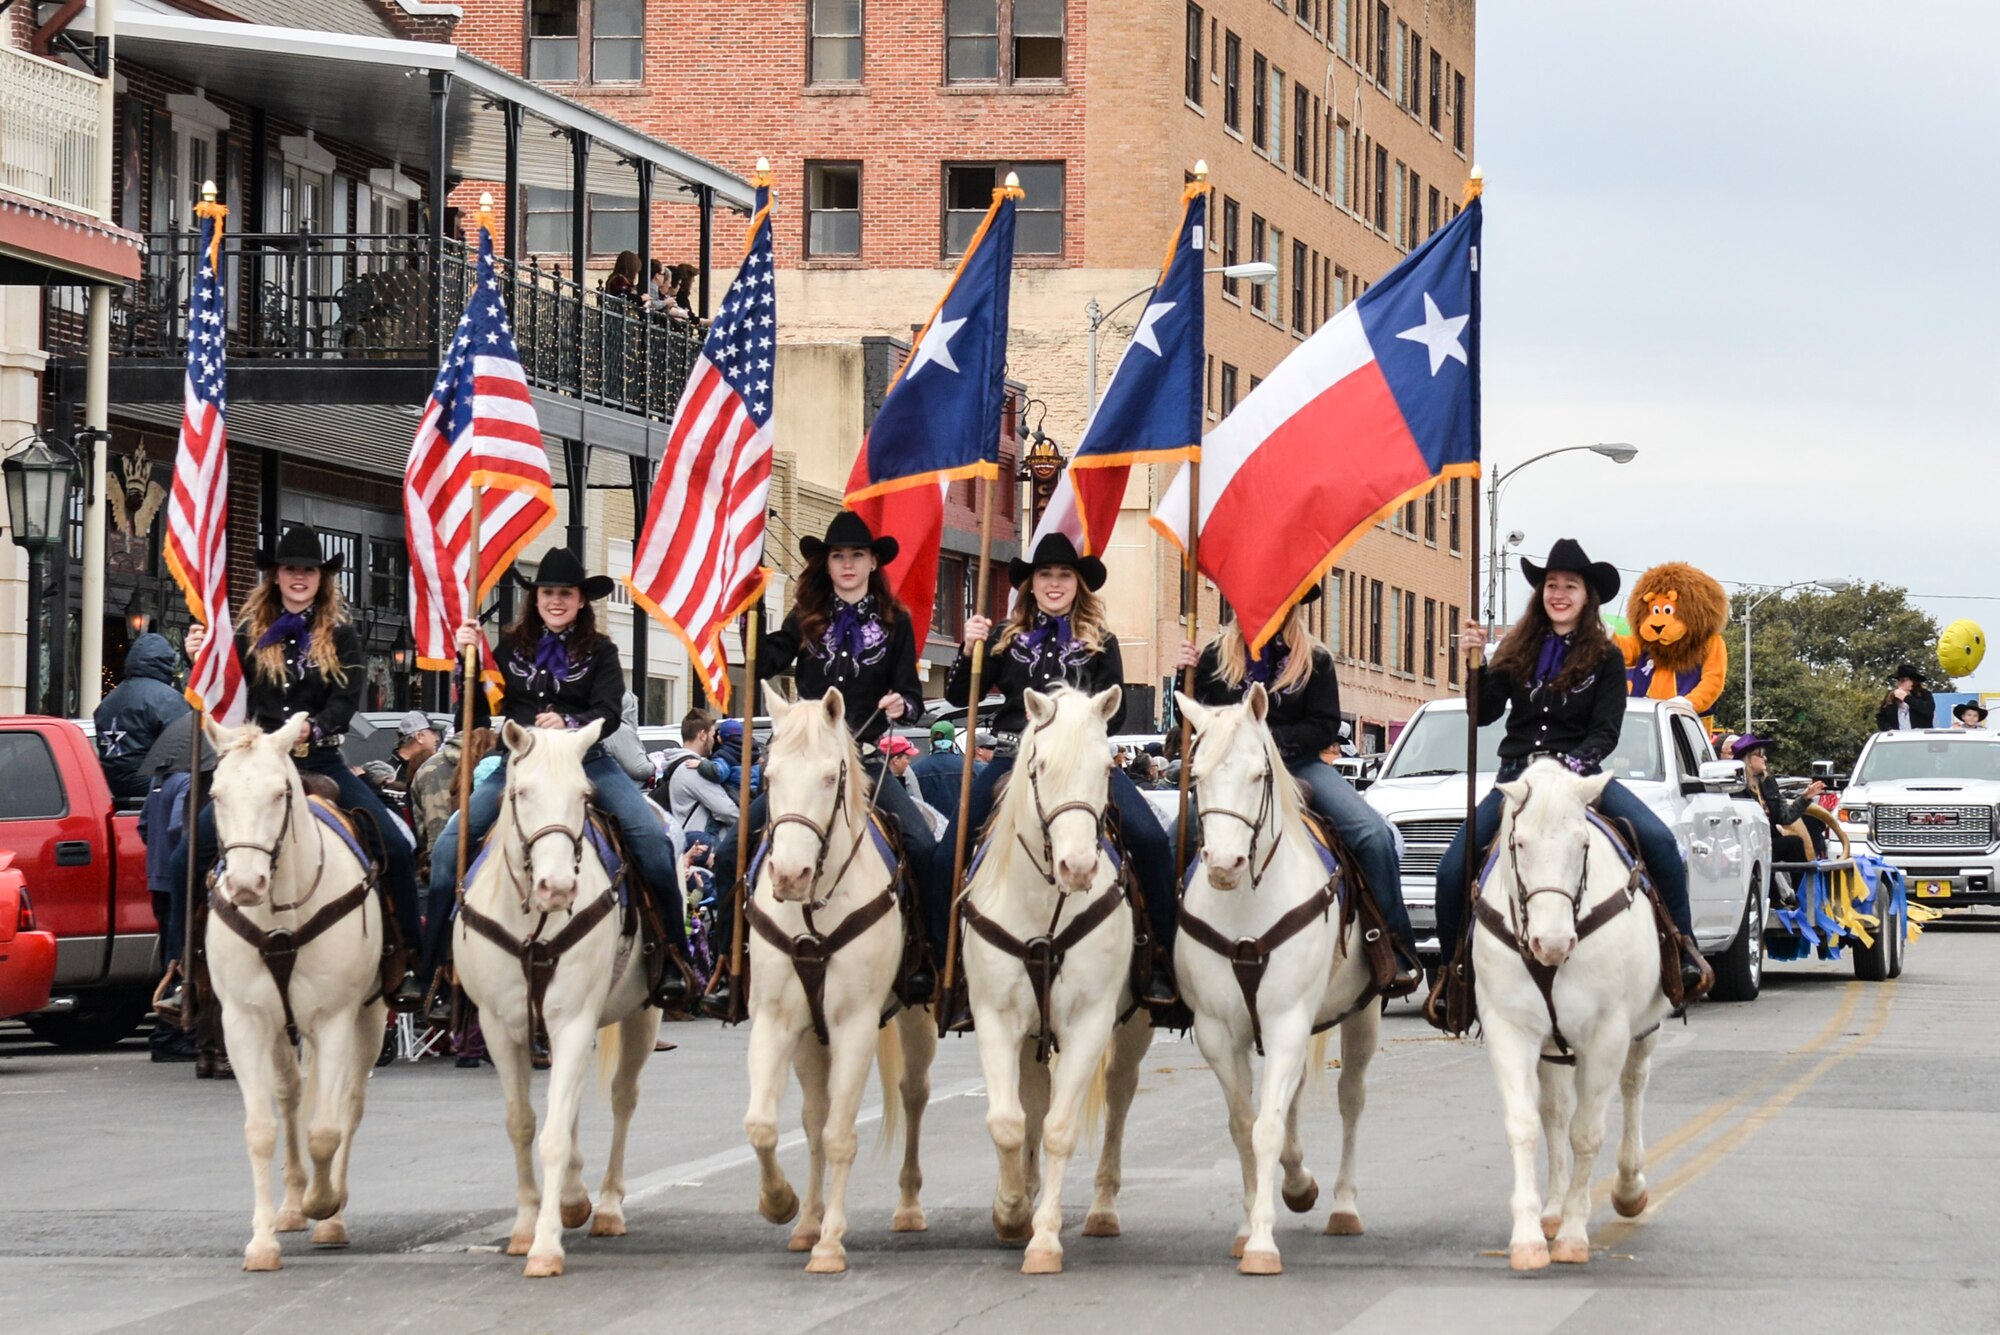 Six white horses and their riders carry American and Texas flags during the rodeo parade in San Angelo, Feb. 3. 2018. The rodeo parade featured 100 entries and included members of the Sante Fe Trail Ride, various floats from clubs and community organizations, antique tractors and local horse clubs. (U.S. Air Force photo by Aryn Lockhart/Released)